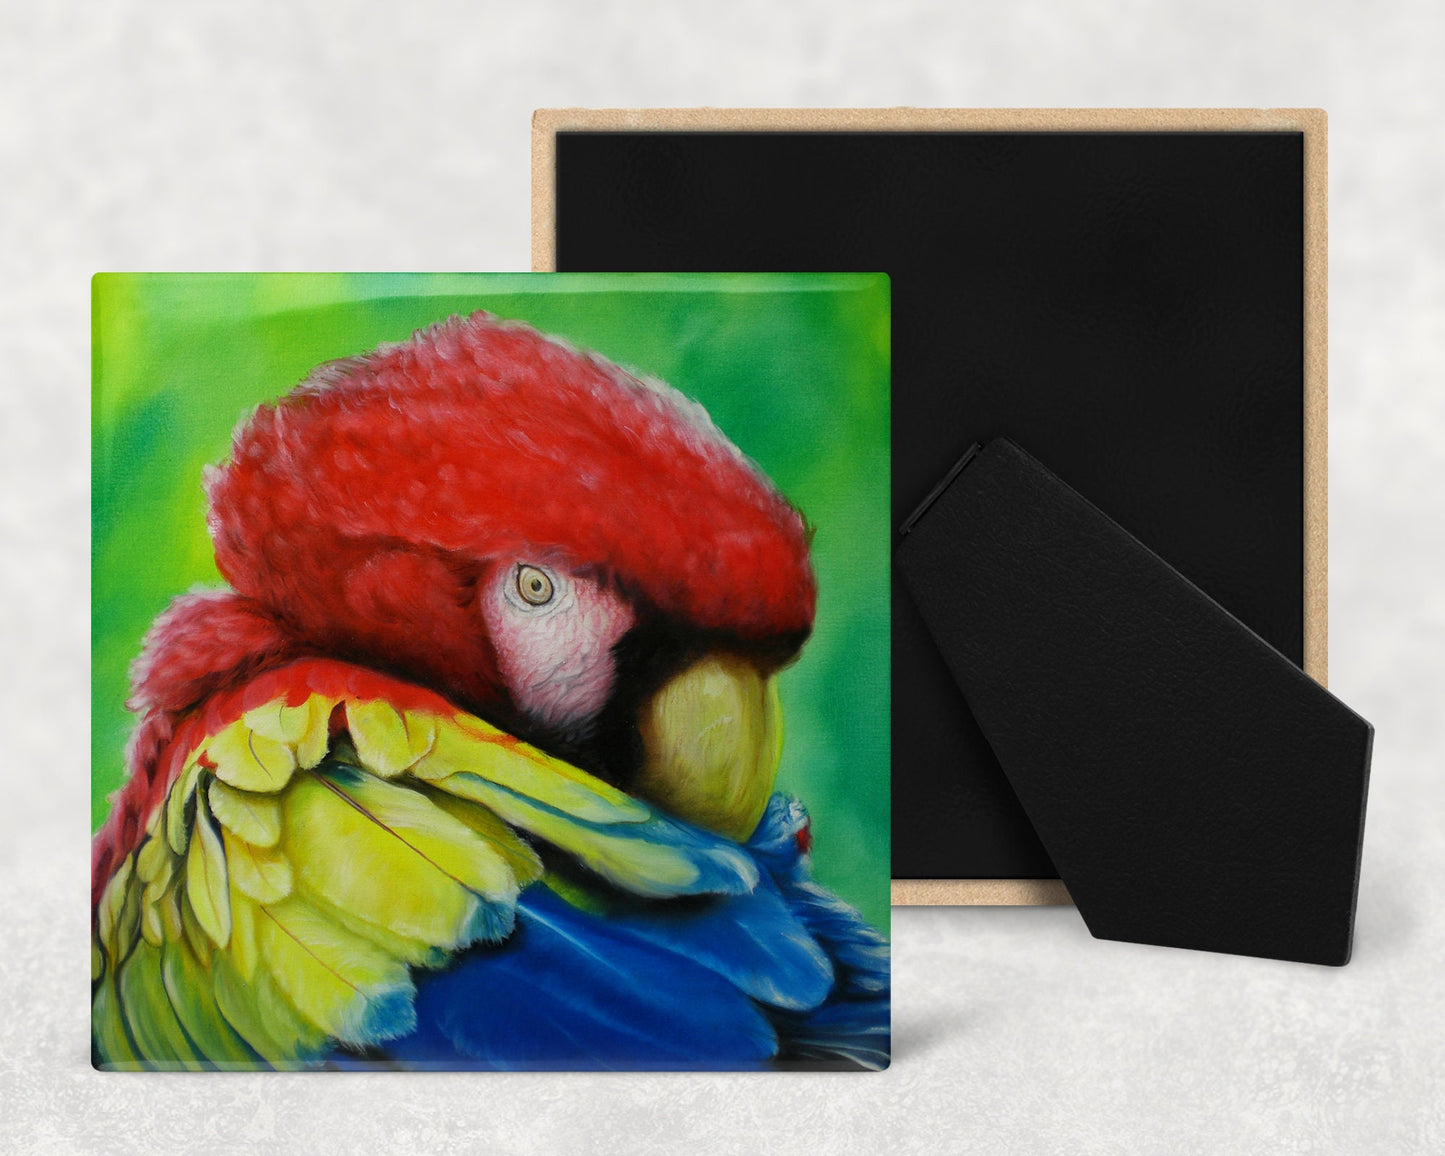 Colorful Macaw Art Decorative Ceramic Tile with Optional Easel Back - Available in 3 Sizes